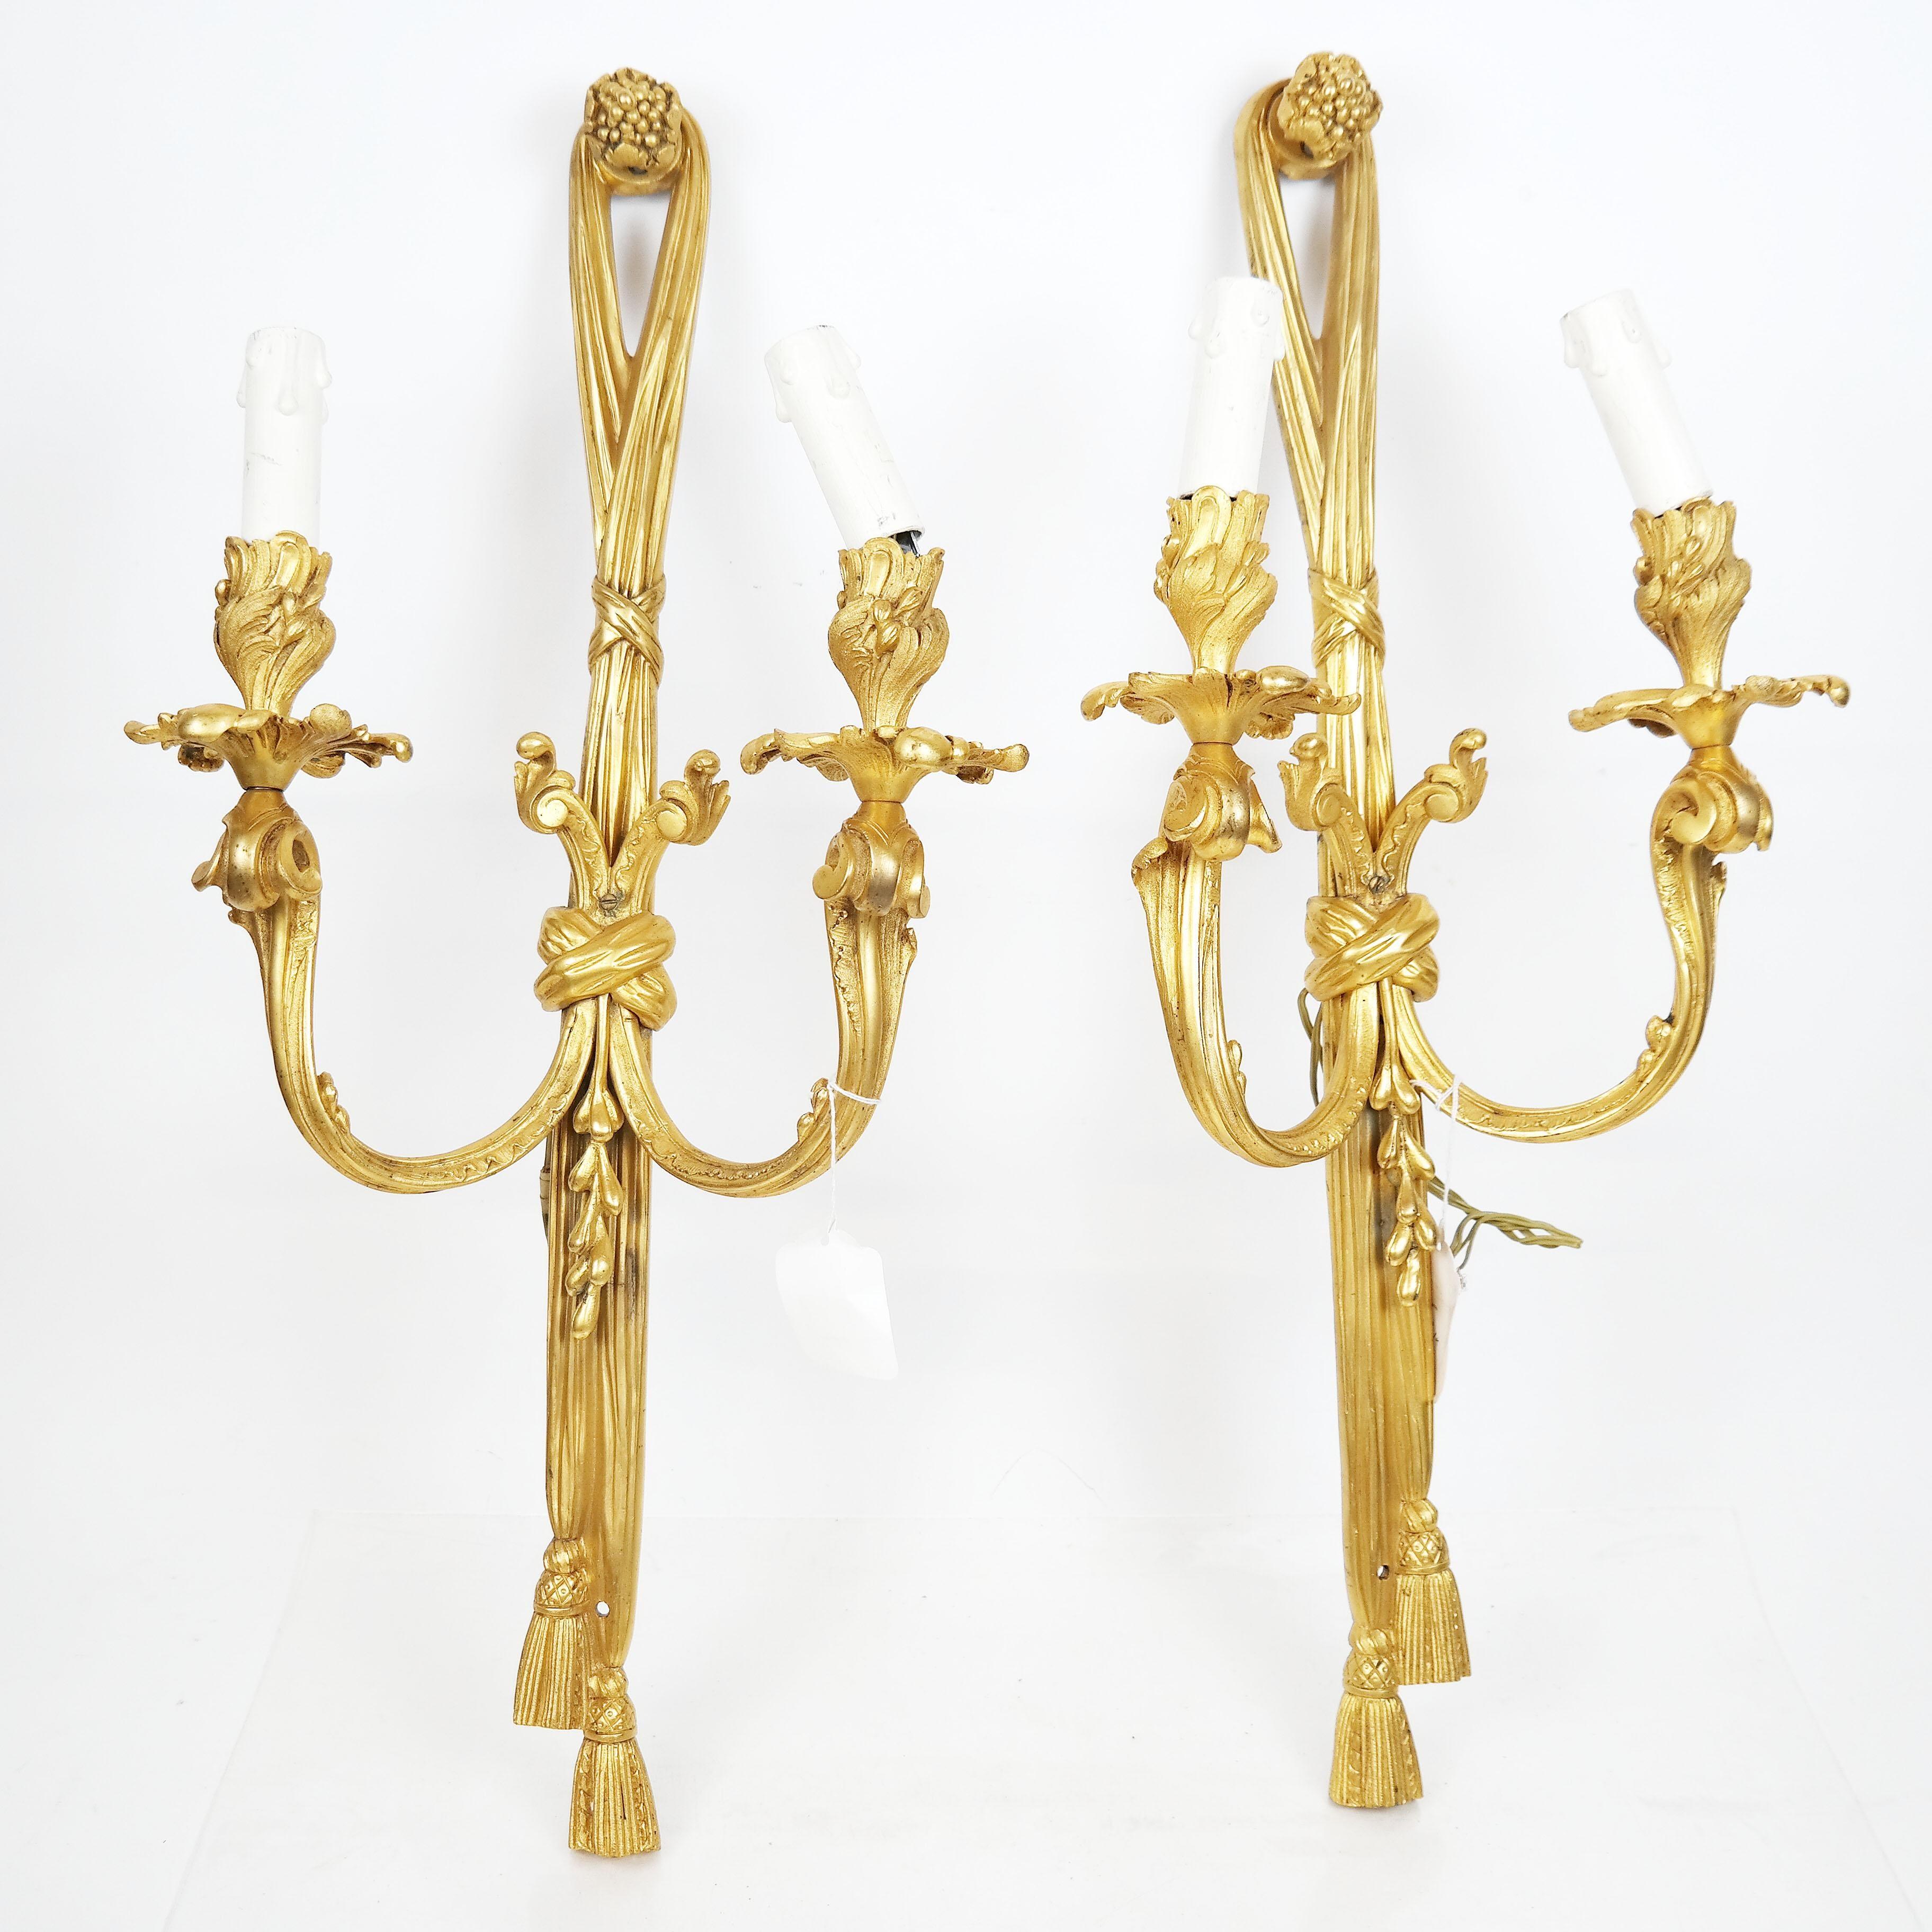 A set of 4 fine 19th century French gilt bronze sconces, having grape cluster finials on ribbon and tassel backs, with scrolling arms with flared bobeches and floral cups. [27